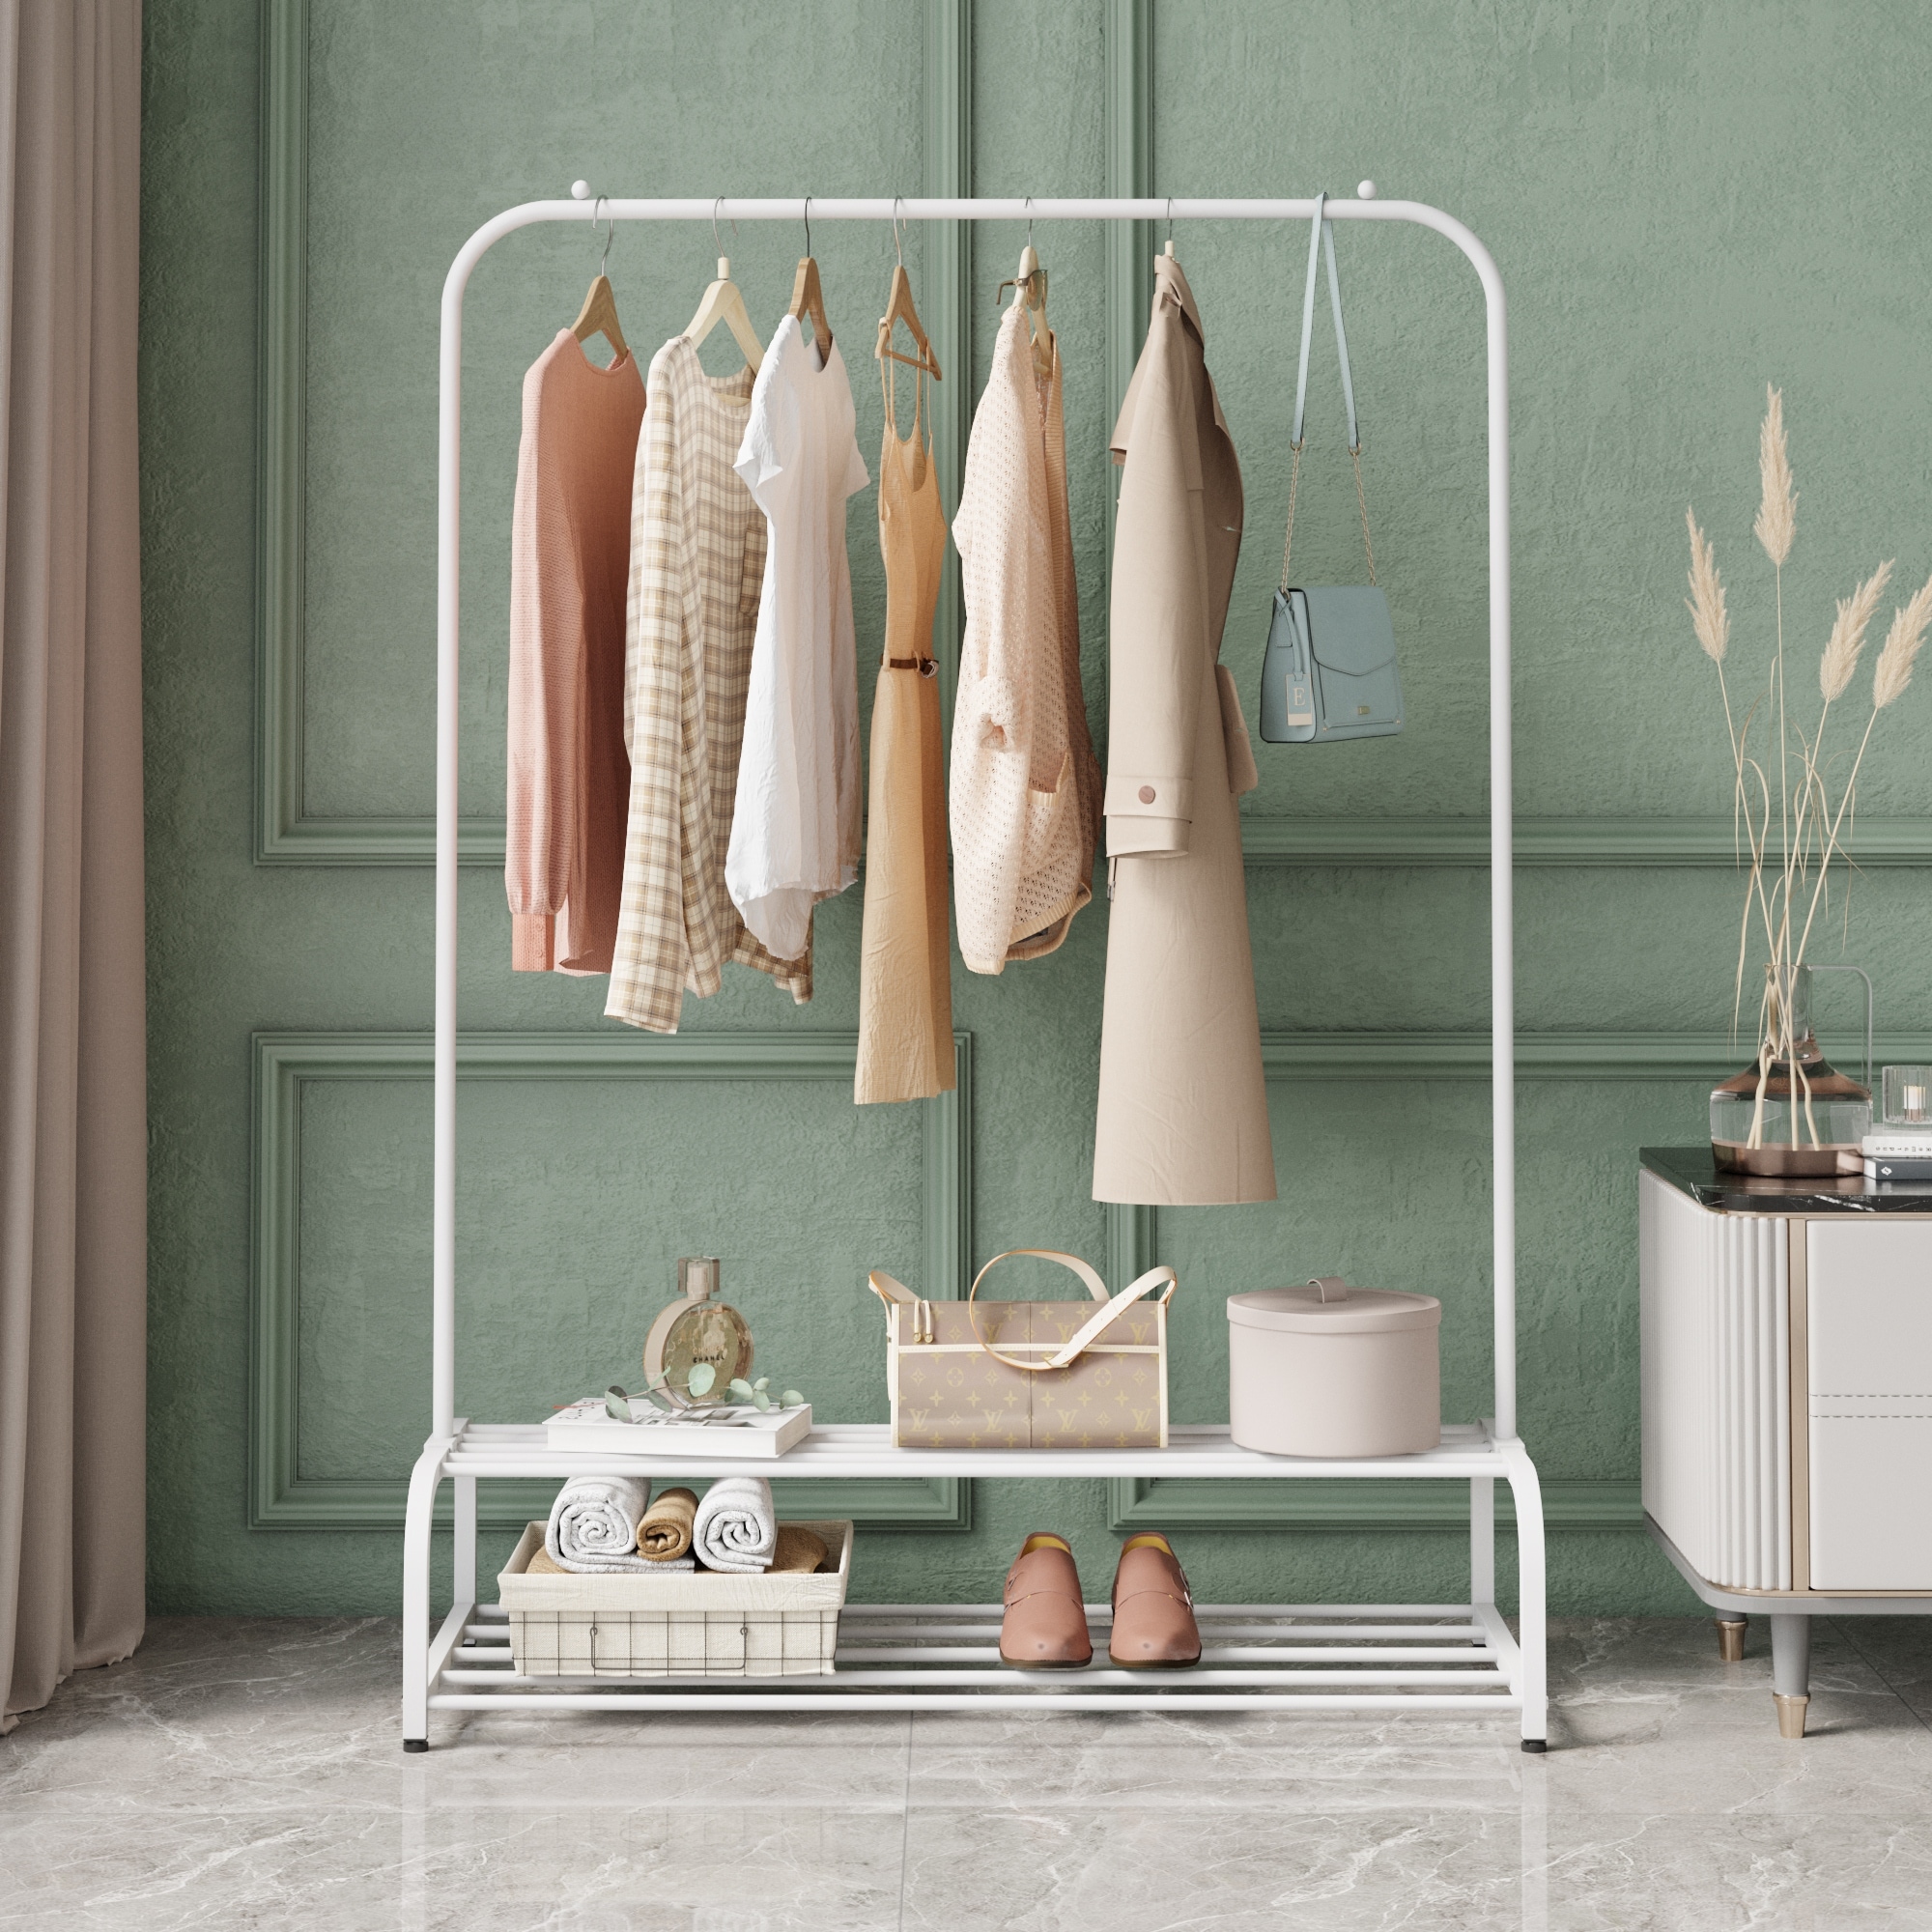 https://ak1.ostkcdn.com/images/products/is/images/direct/cc0ef8afb18ff2b775d9faff075c587cca0e6eb0/Clothing-Garment-Rack-with-Shelves%2C-Metal-Cloth-Hanger-Rack-Stand-Clothes-Drying-Rack.jpg